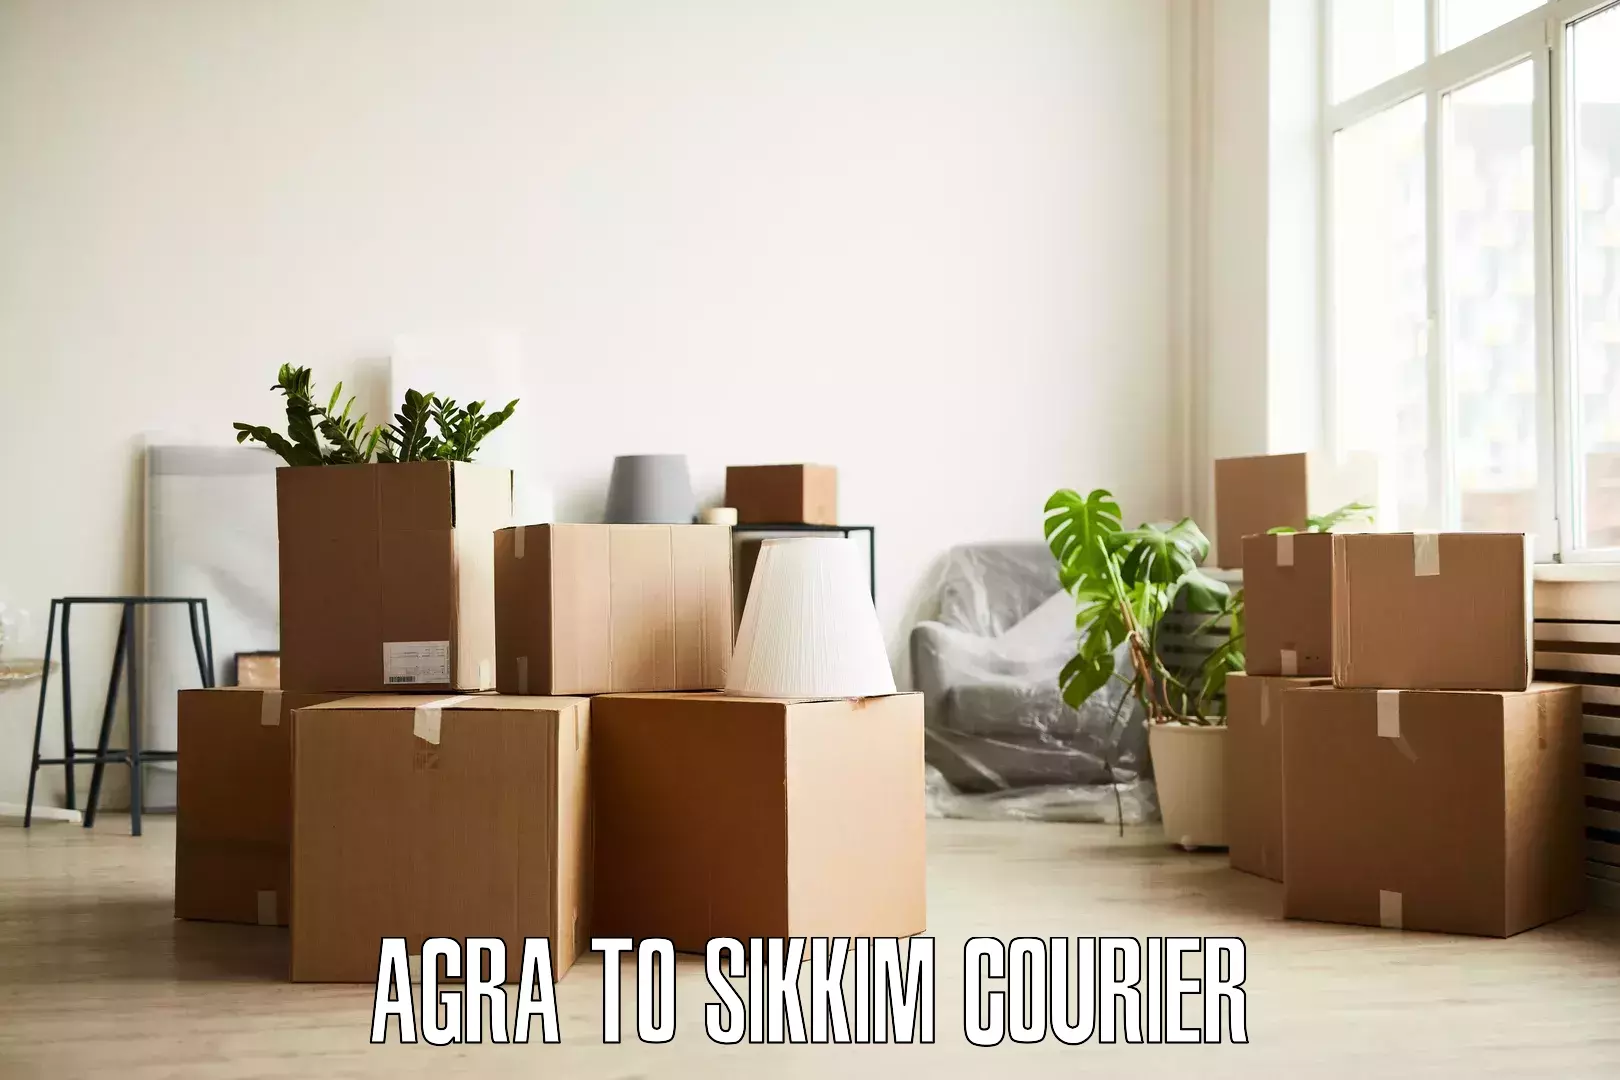 Home goods moving company Agra to Pelling